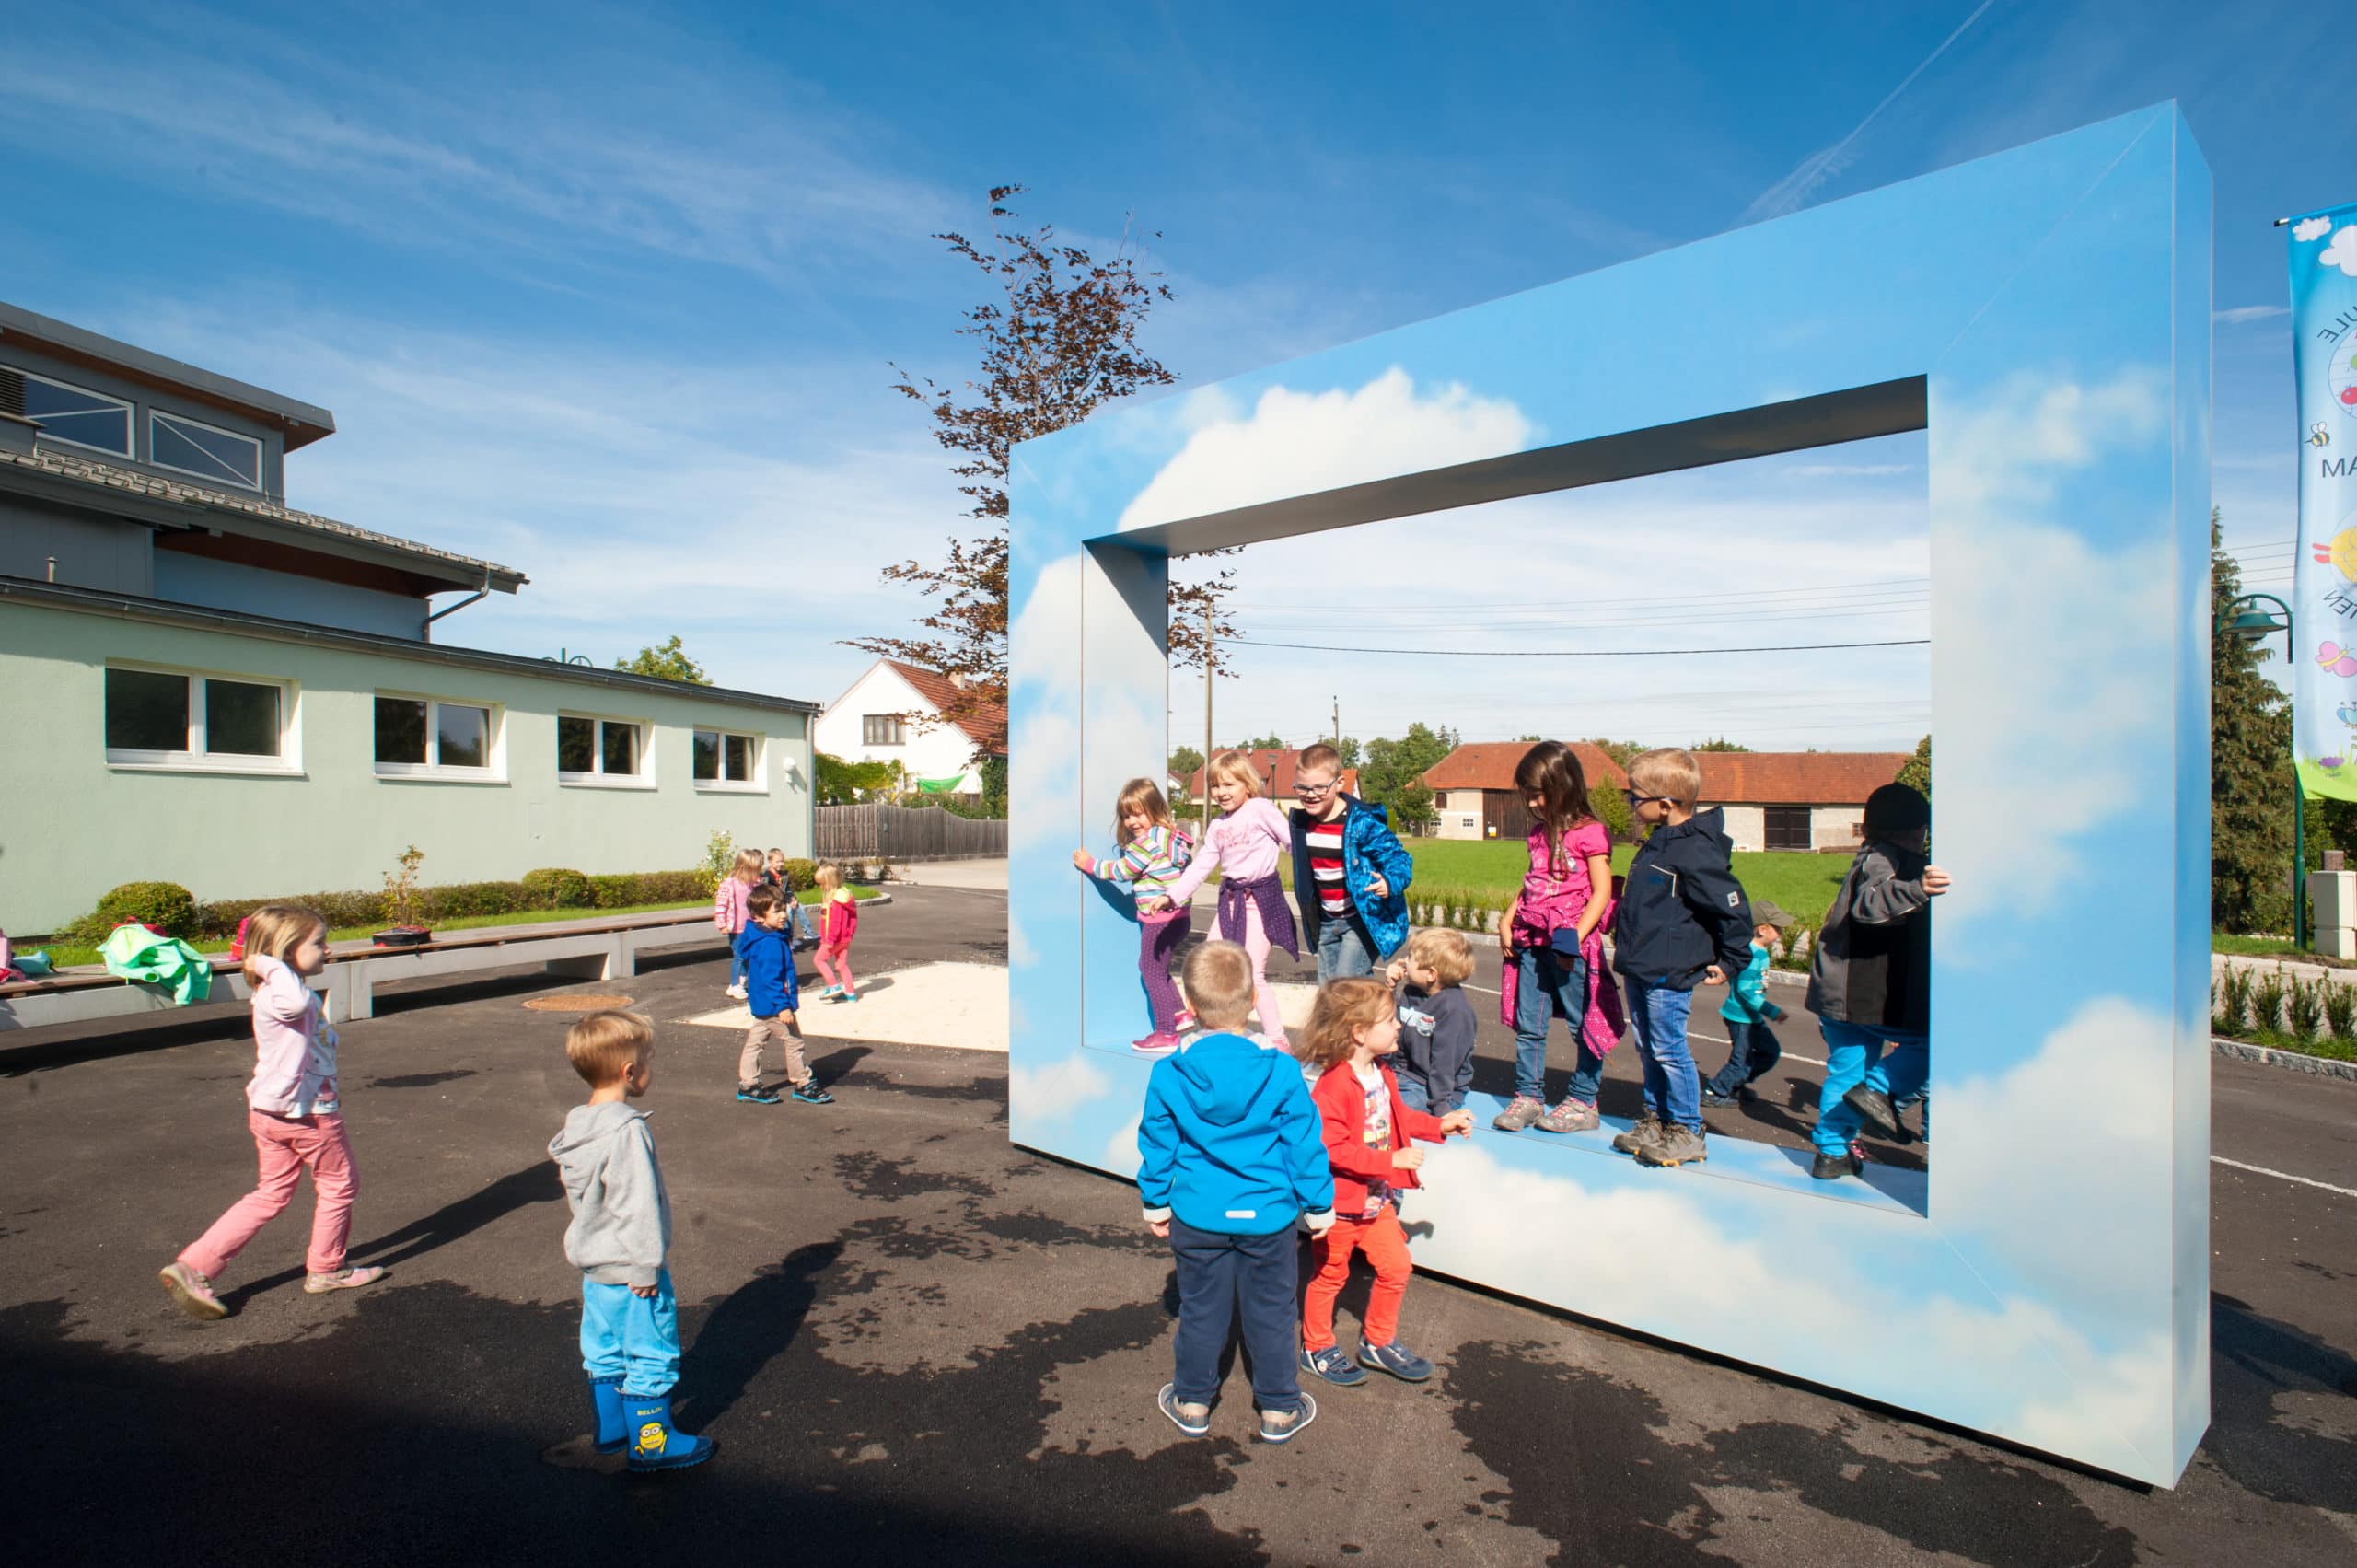 Sky Themed Picture Frame at School with Max Compact Exterior HPL panels